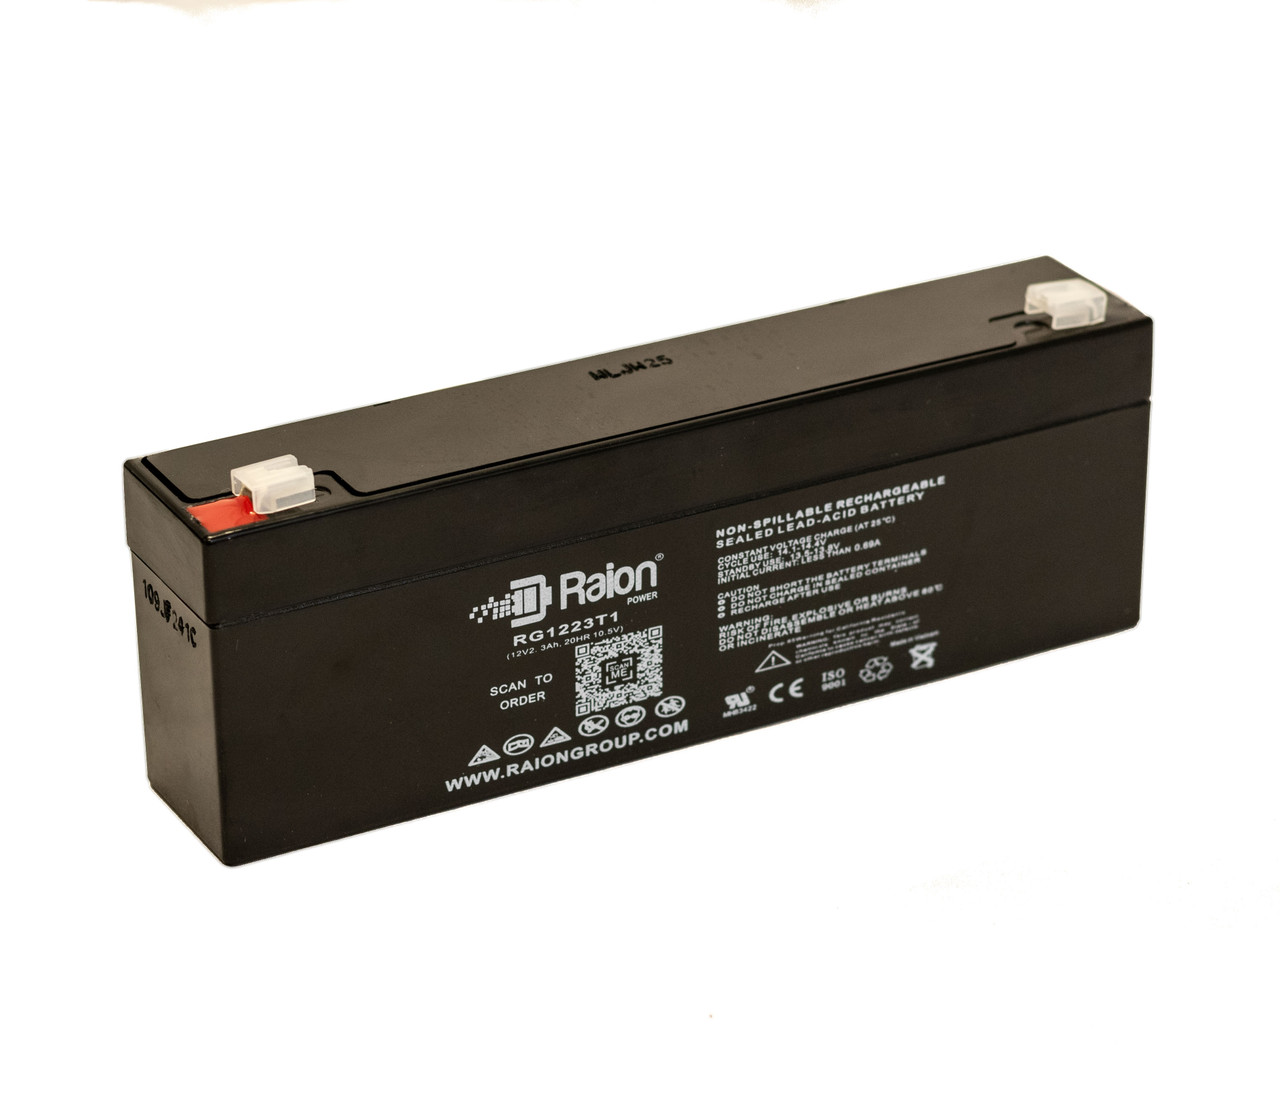 Raion Power RG1223T1 12V 2.3Ah Replacement UPS Battery for IntelliPower 625VA 500W FA00001